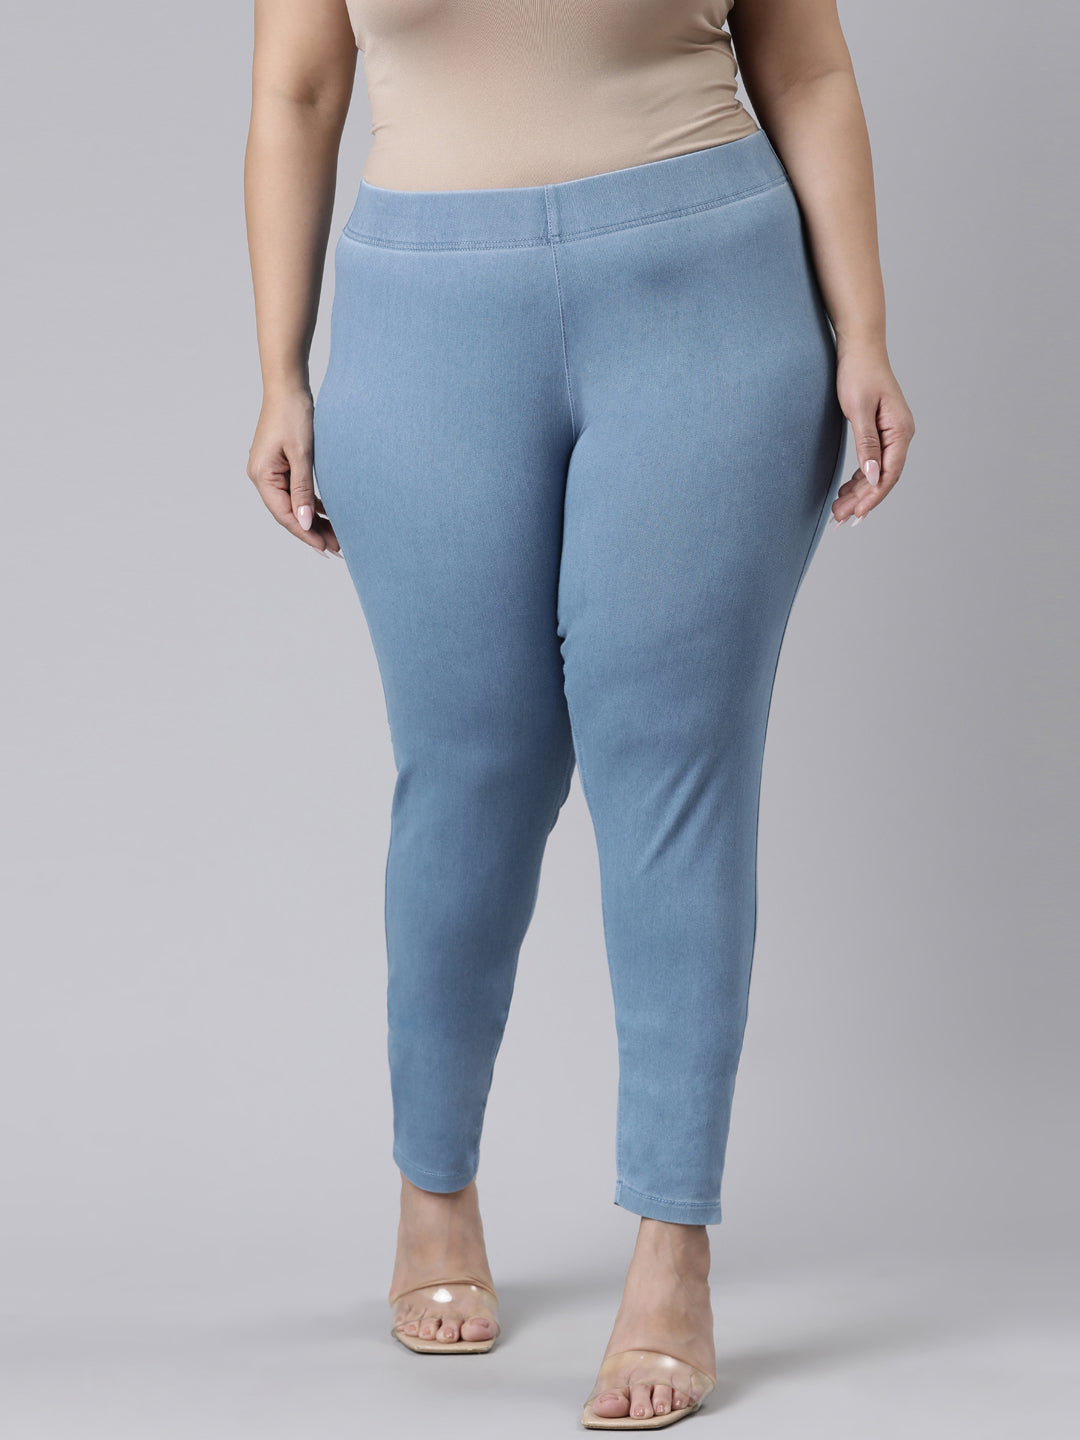 GO COLORS Blue Legging 360 stretch Denim in Bangalore at best price by  Colors Nest - Justdial